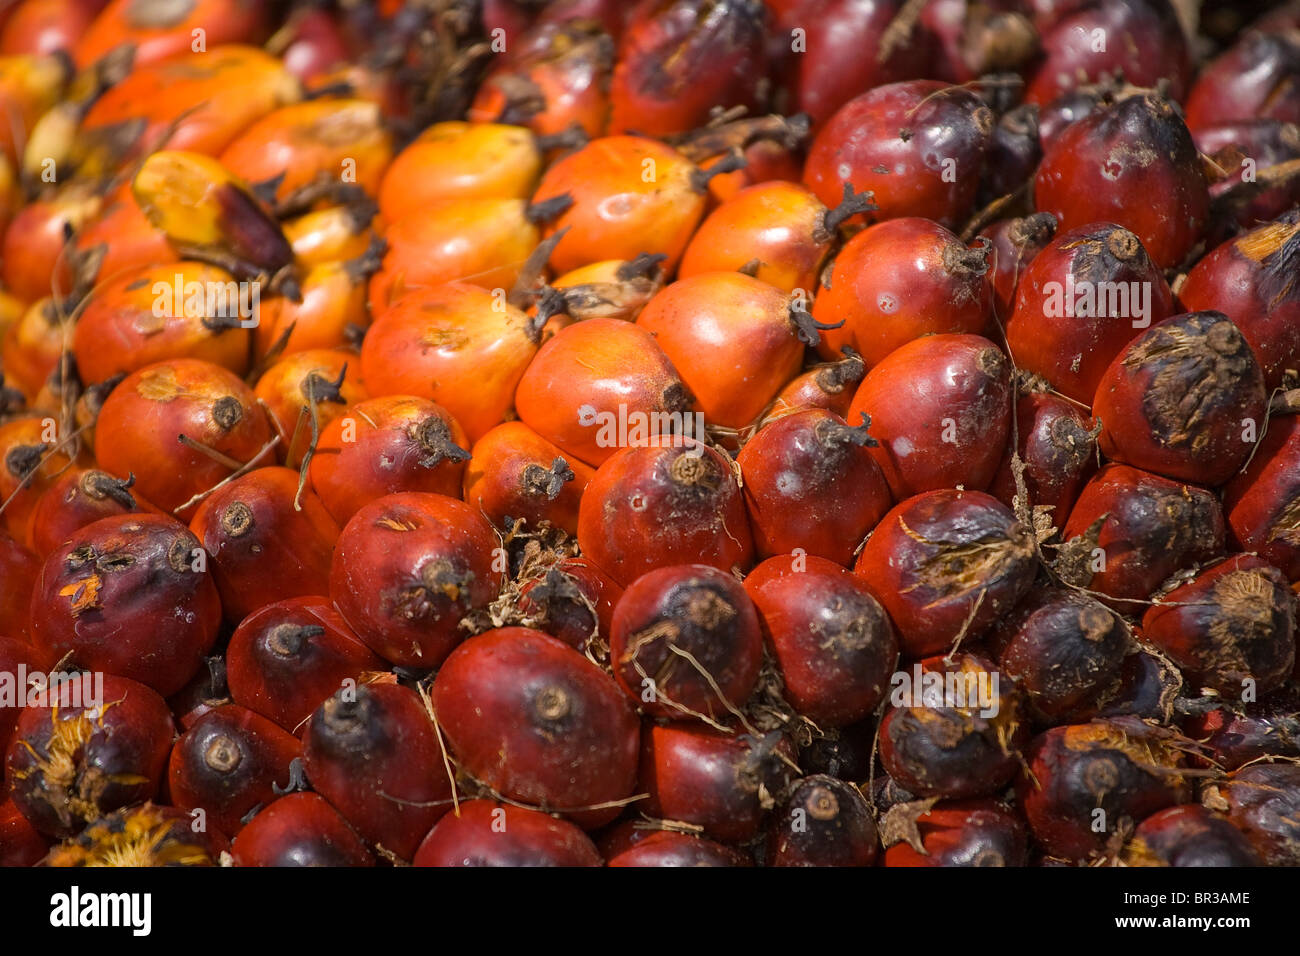 By the way, doctor: Is palm oil good for you? - Harvard Health